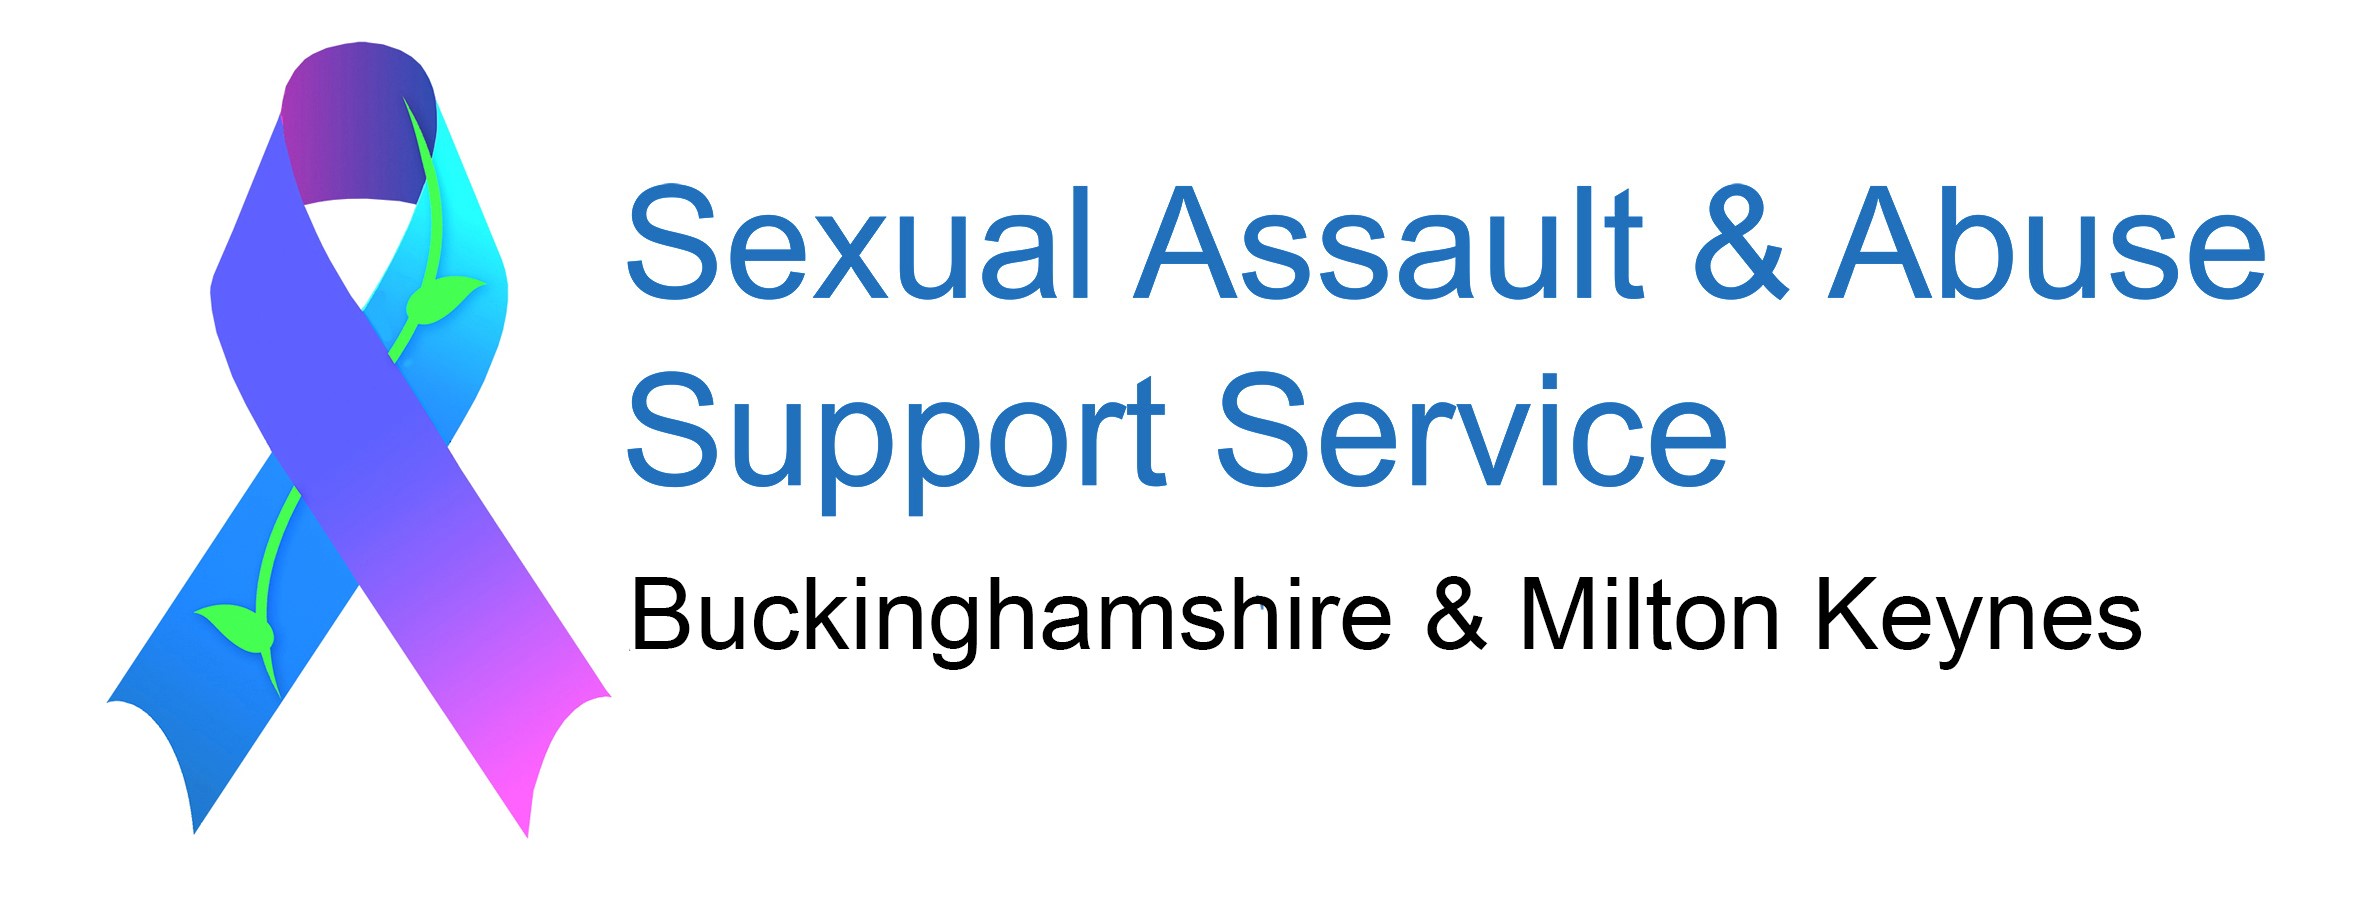 Sexual Assault and Abuse Support Service BMK